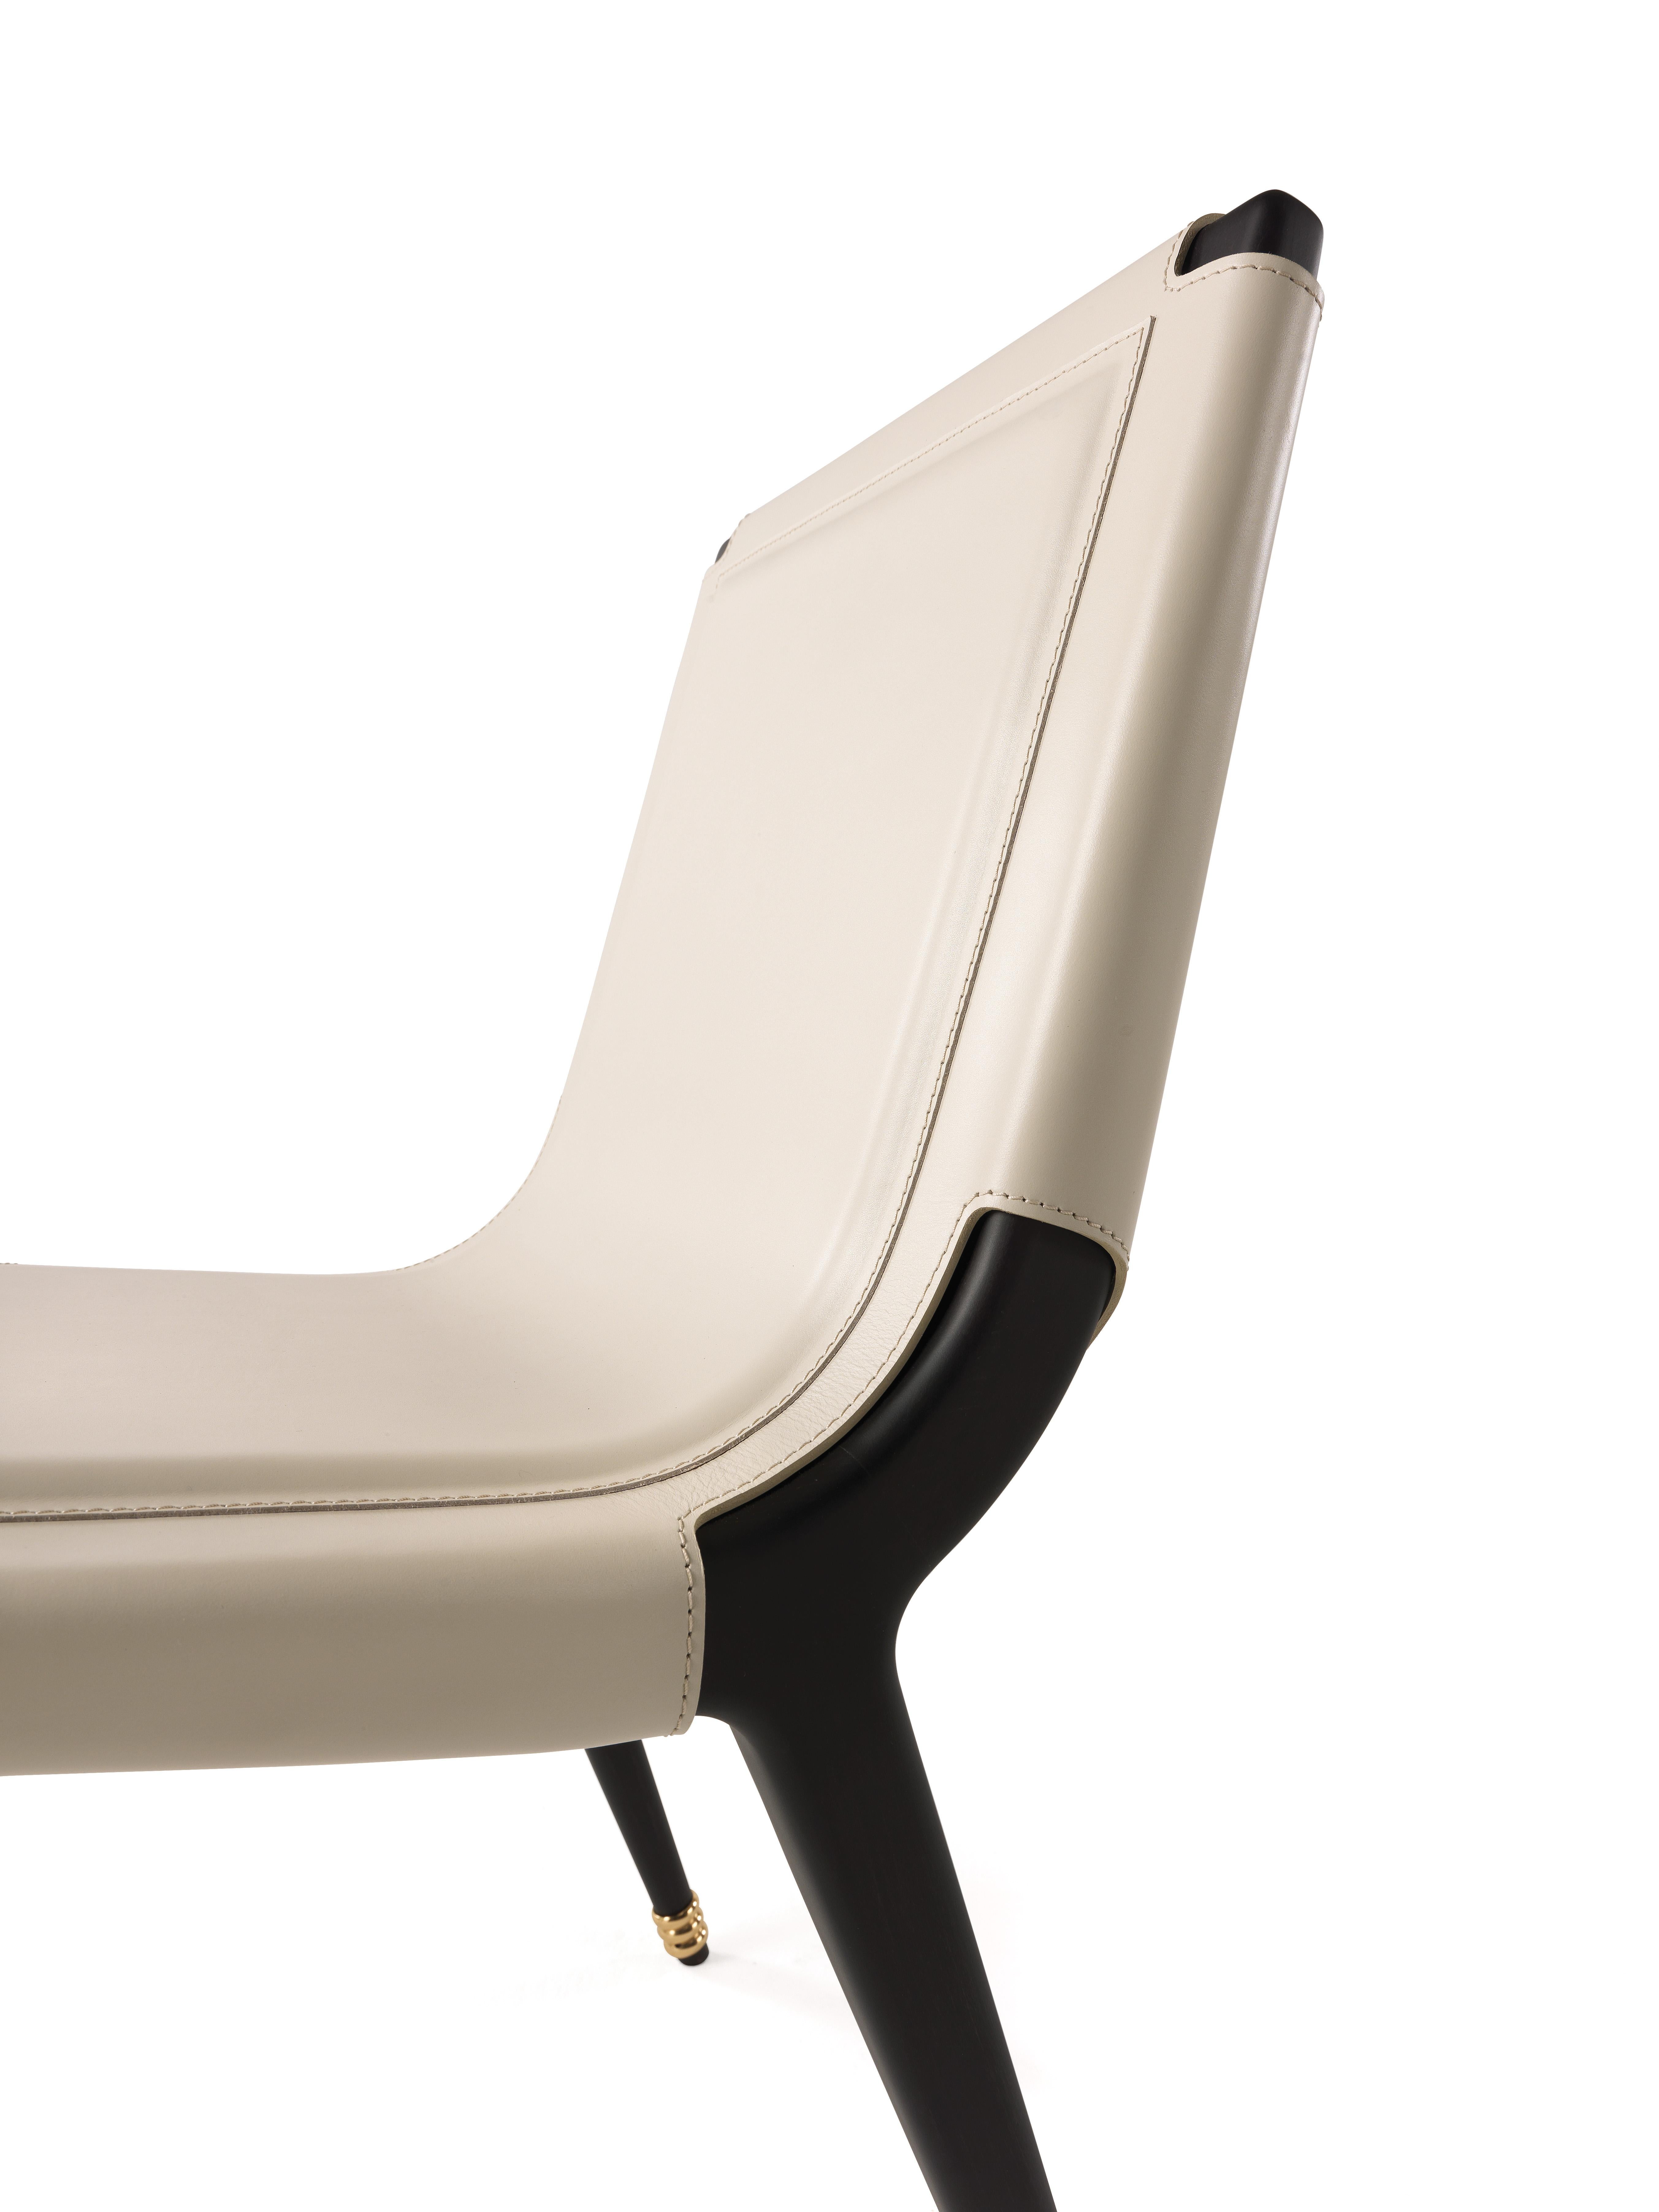 21st Century Dinka Chair in Leather Col. Milk by Etro Home Interiors In New Condition For Sale In Cantù, Lombardia